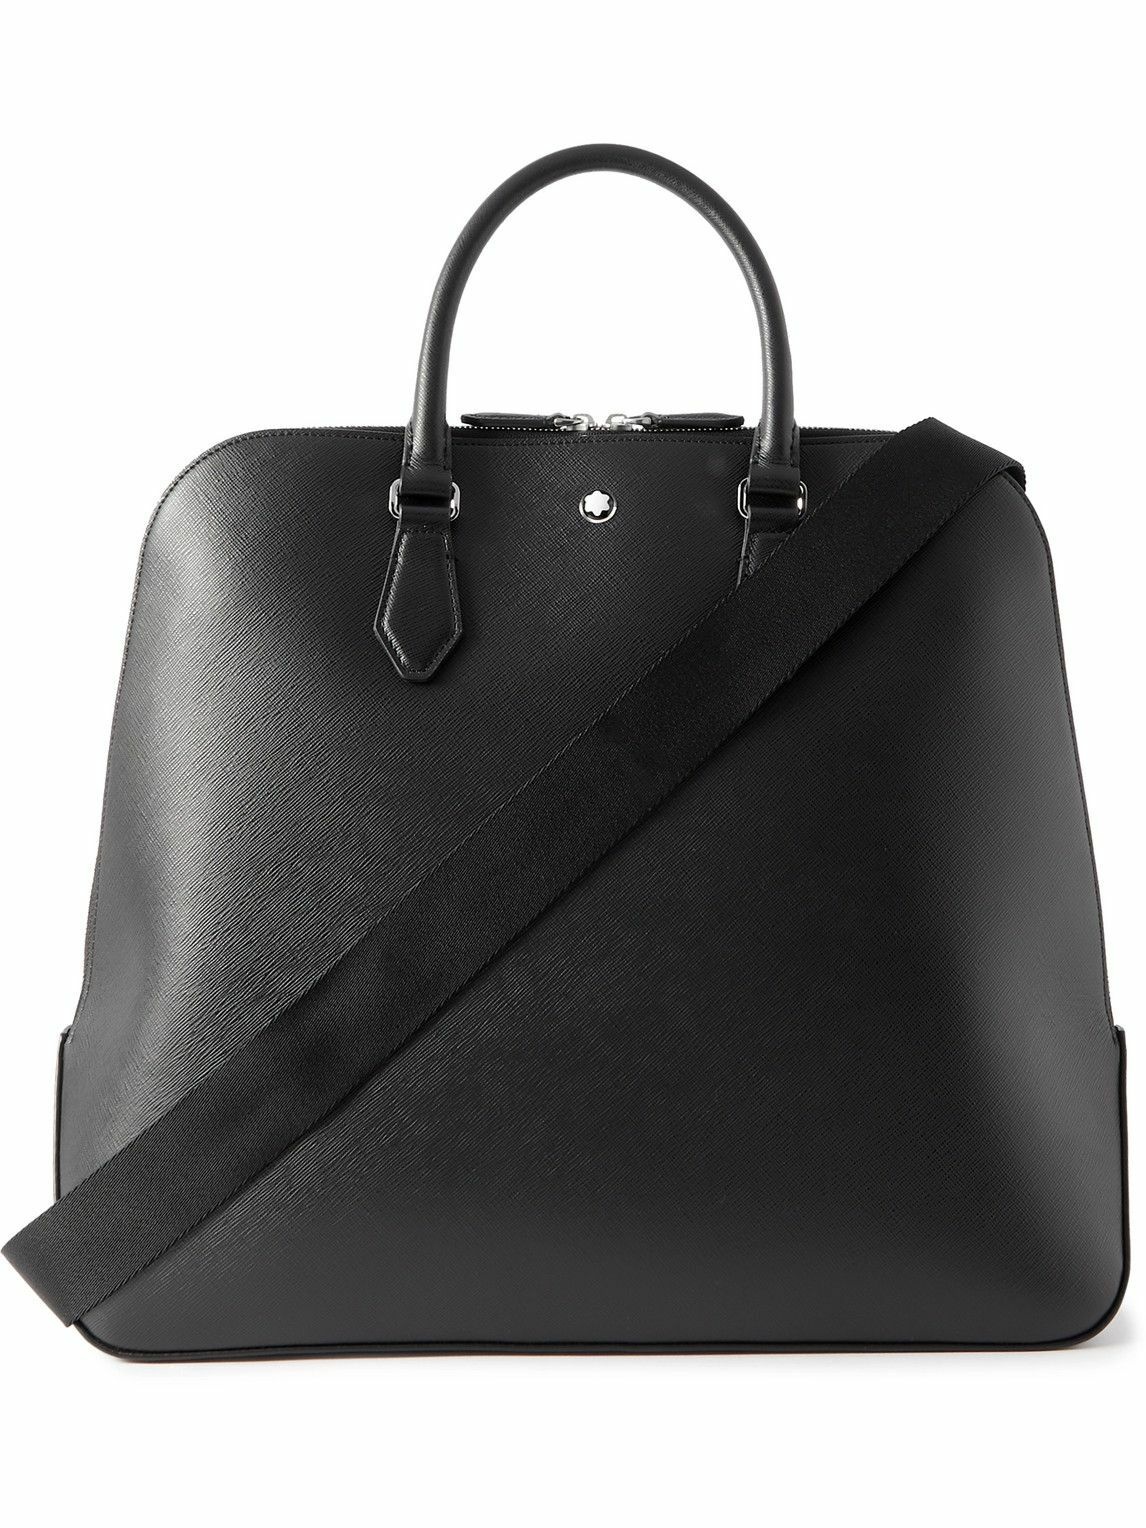 Montblanc - Cross-Grain Leather Tote Bag Montblanc